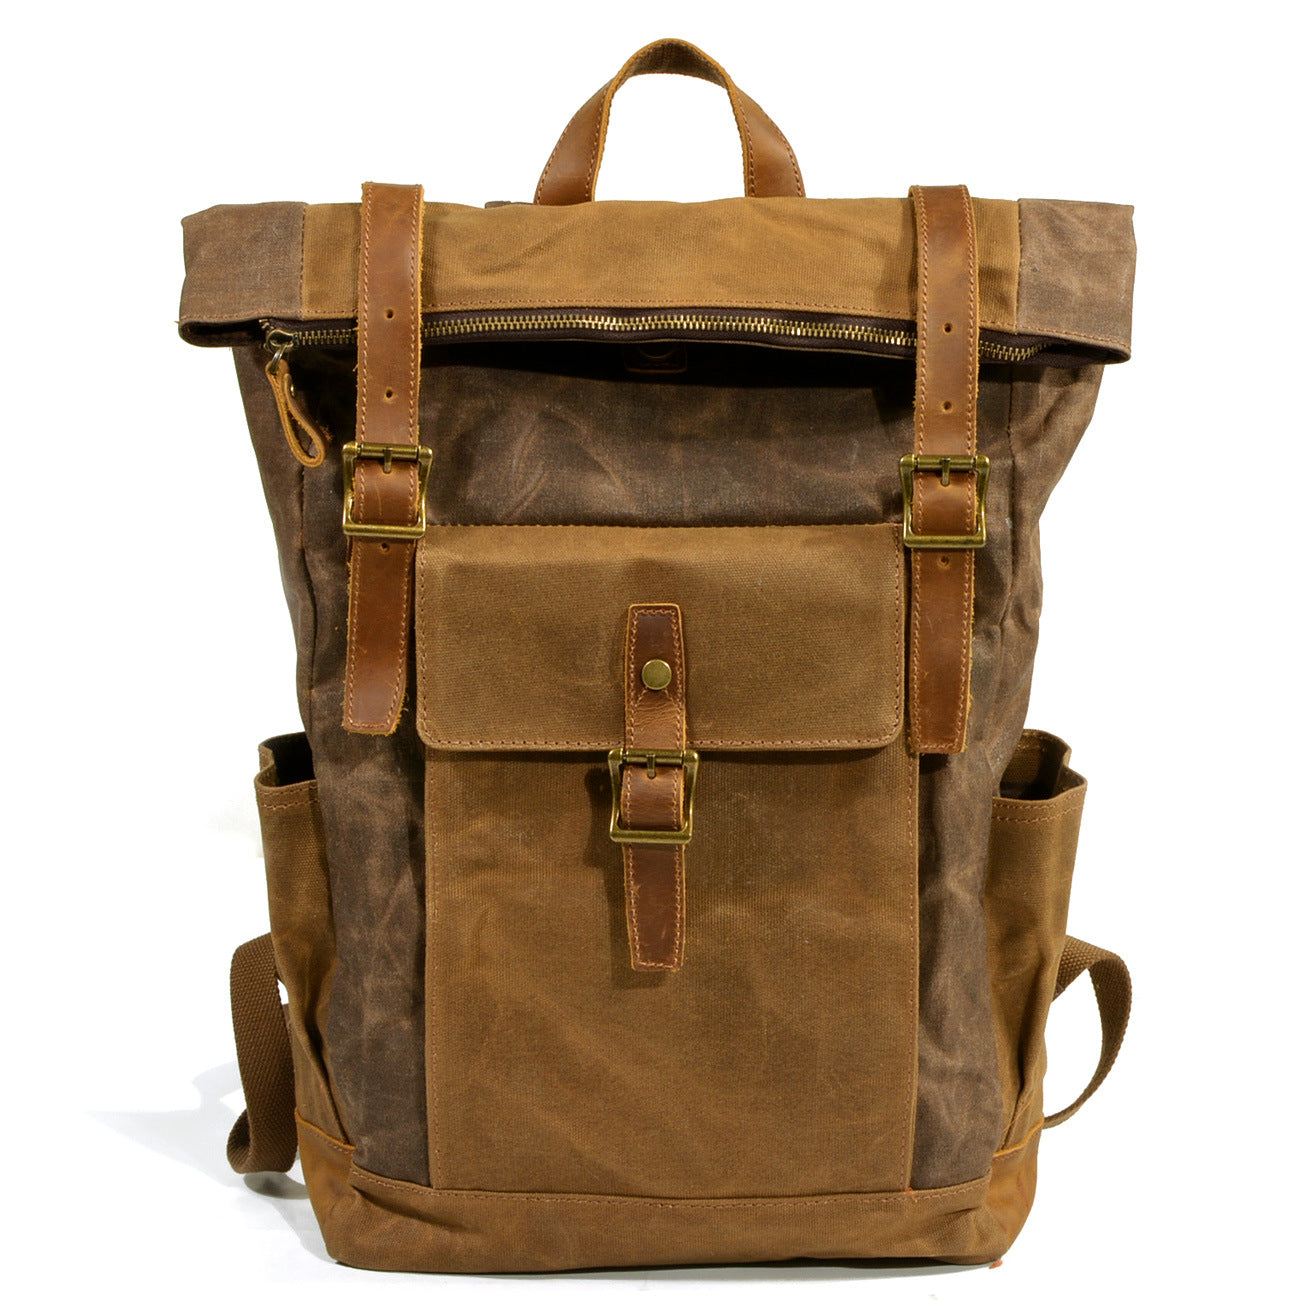 Vintage Men Leather Canvas Rucksack for Traveling 9120-Leather Canvas Backpack-Dark Gray-Free Shipping Leatheretro